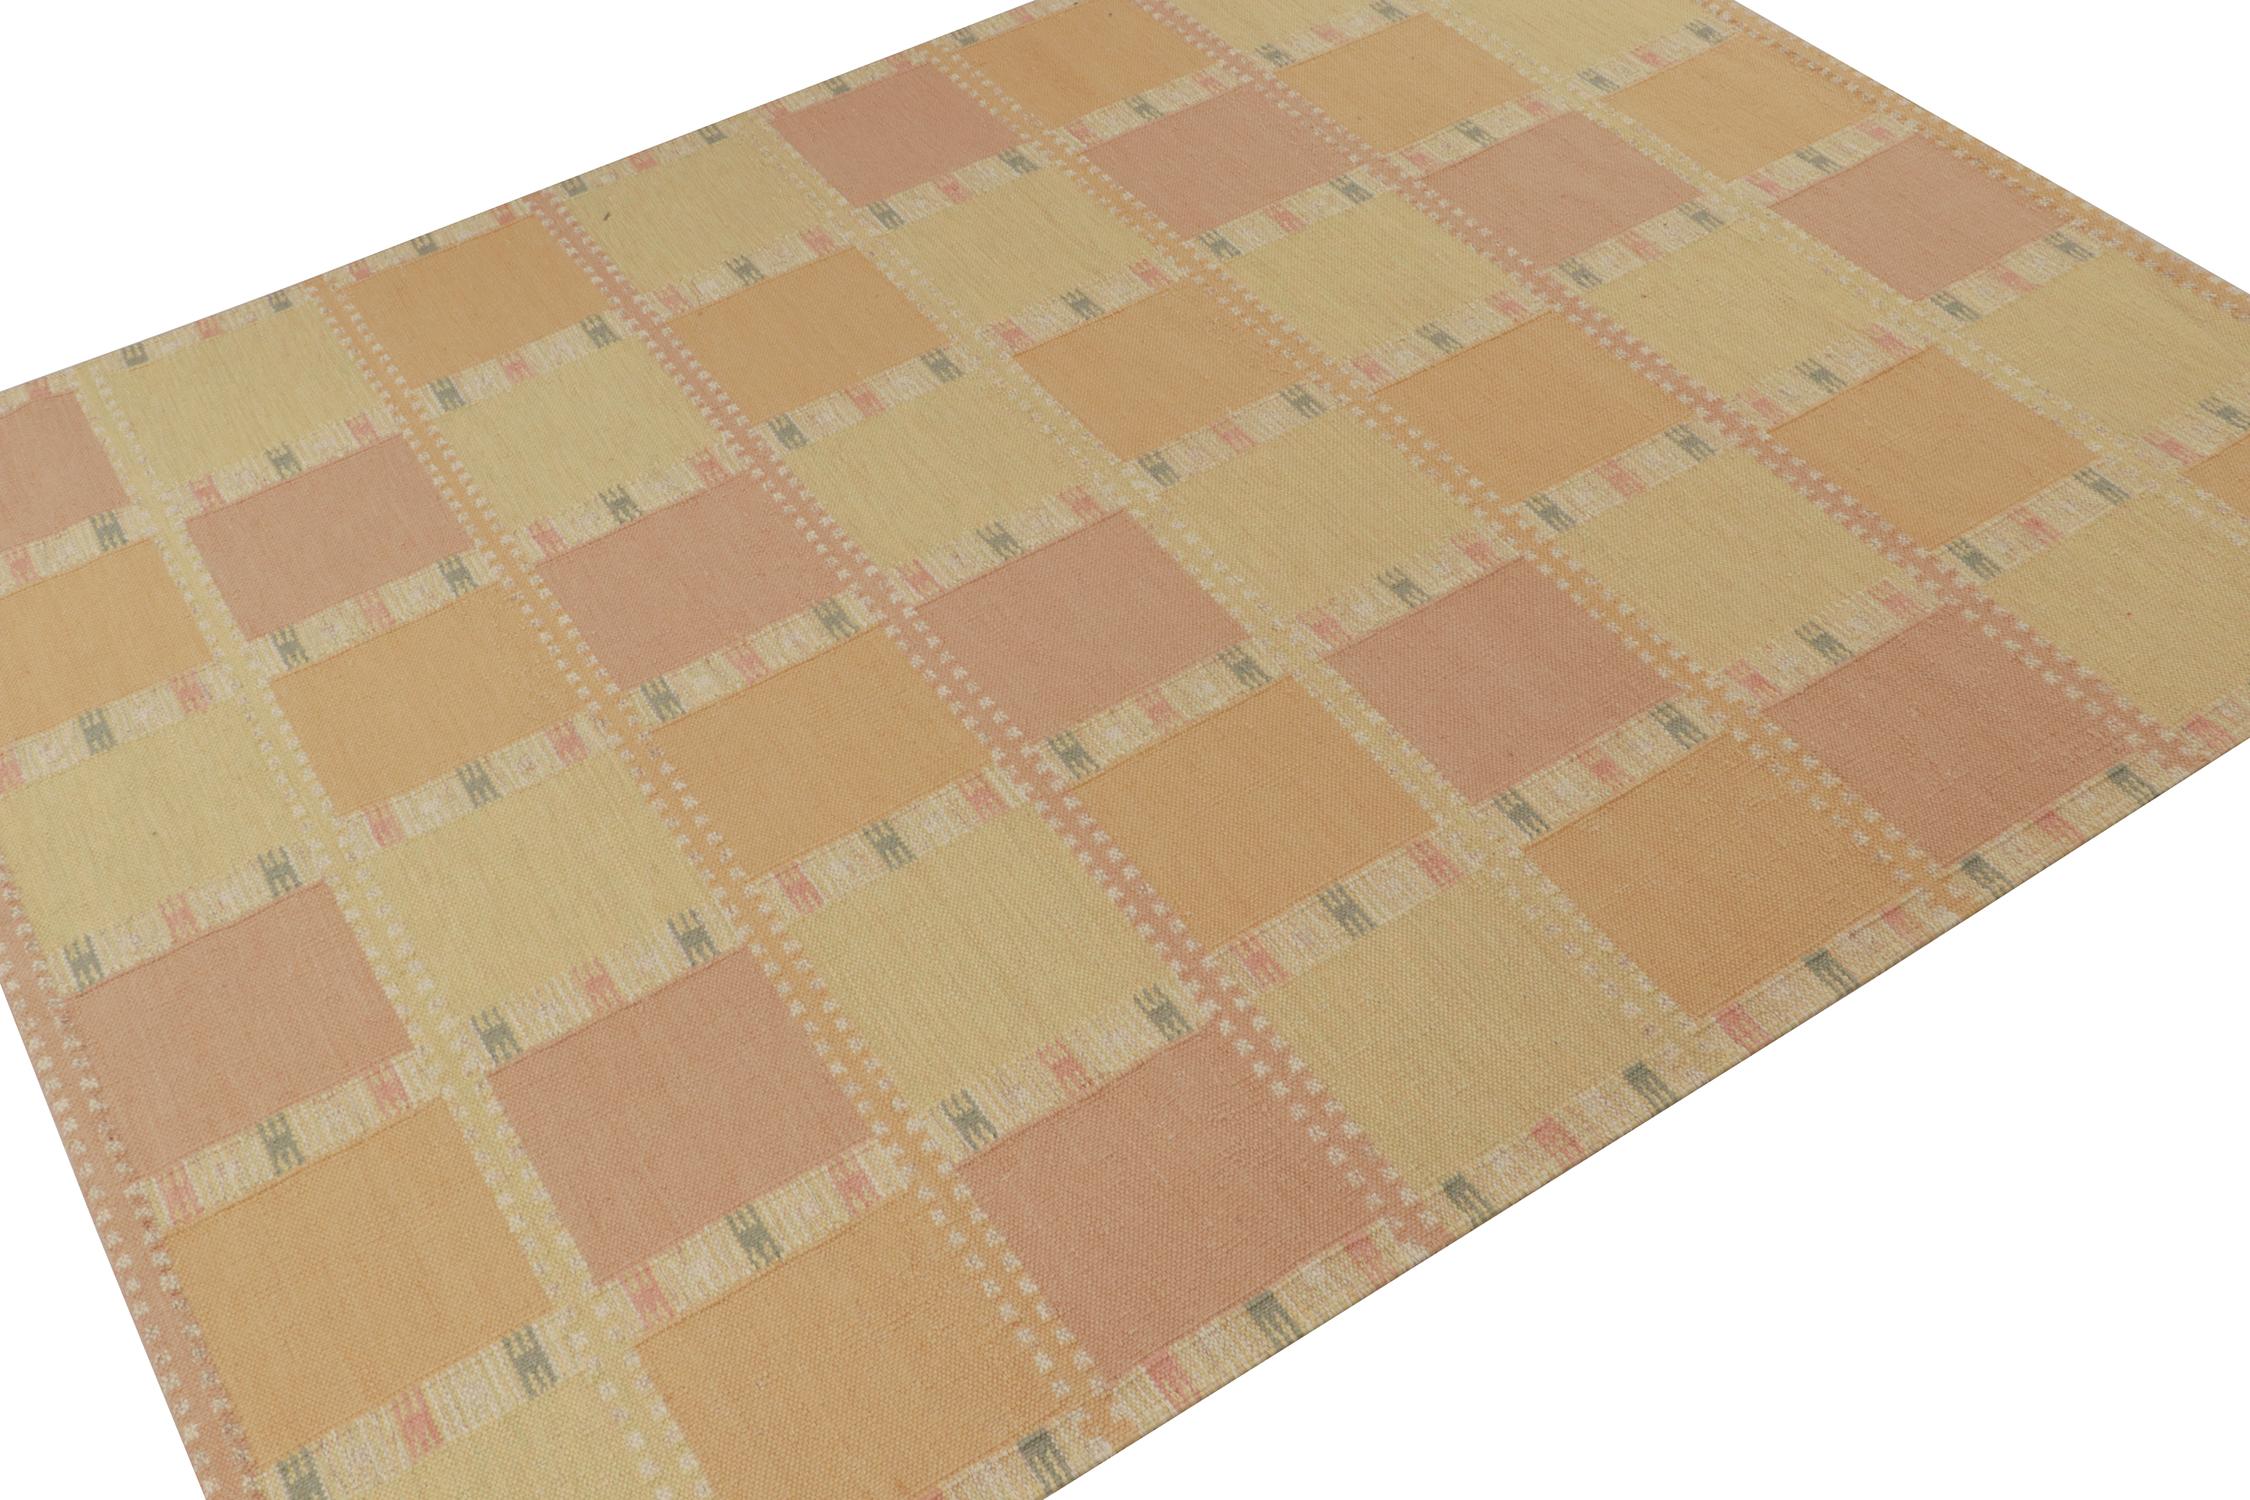 A smart 9 x 12 Swedish style kilim from our award-winning Scandinavian flat weave collection. Handwoven in wool. 
On the Design: 
This rug enjoys geometric patterns in the most refreshing gold and pink with yellow and white notes of gorgeous